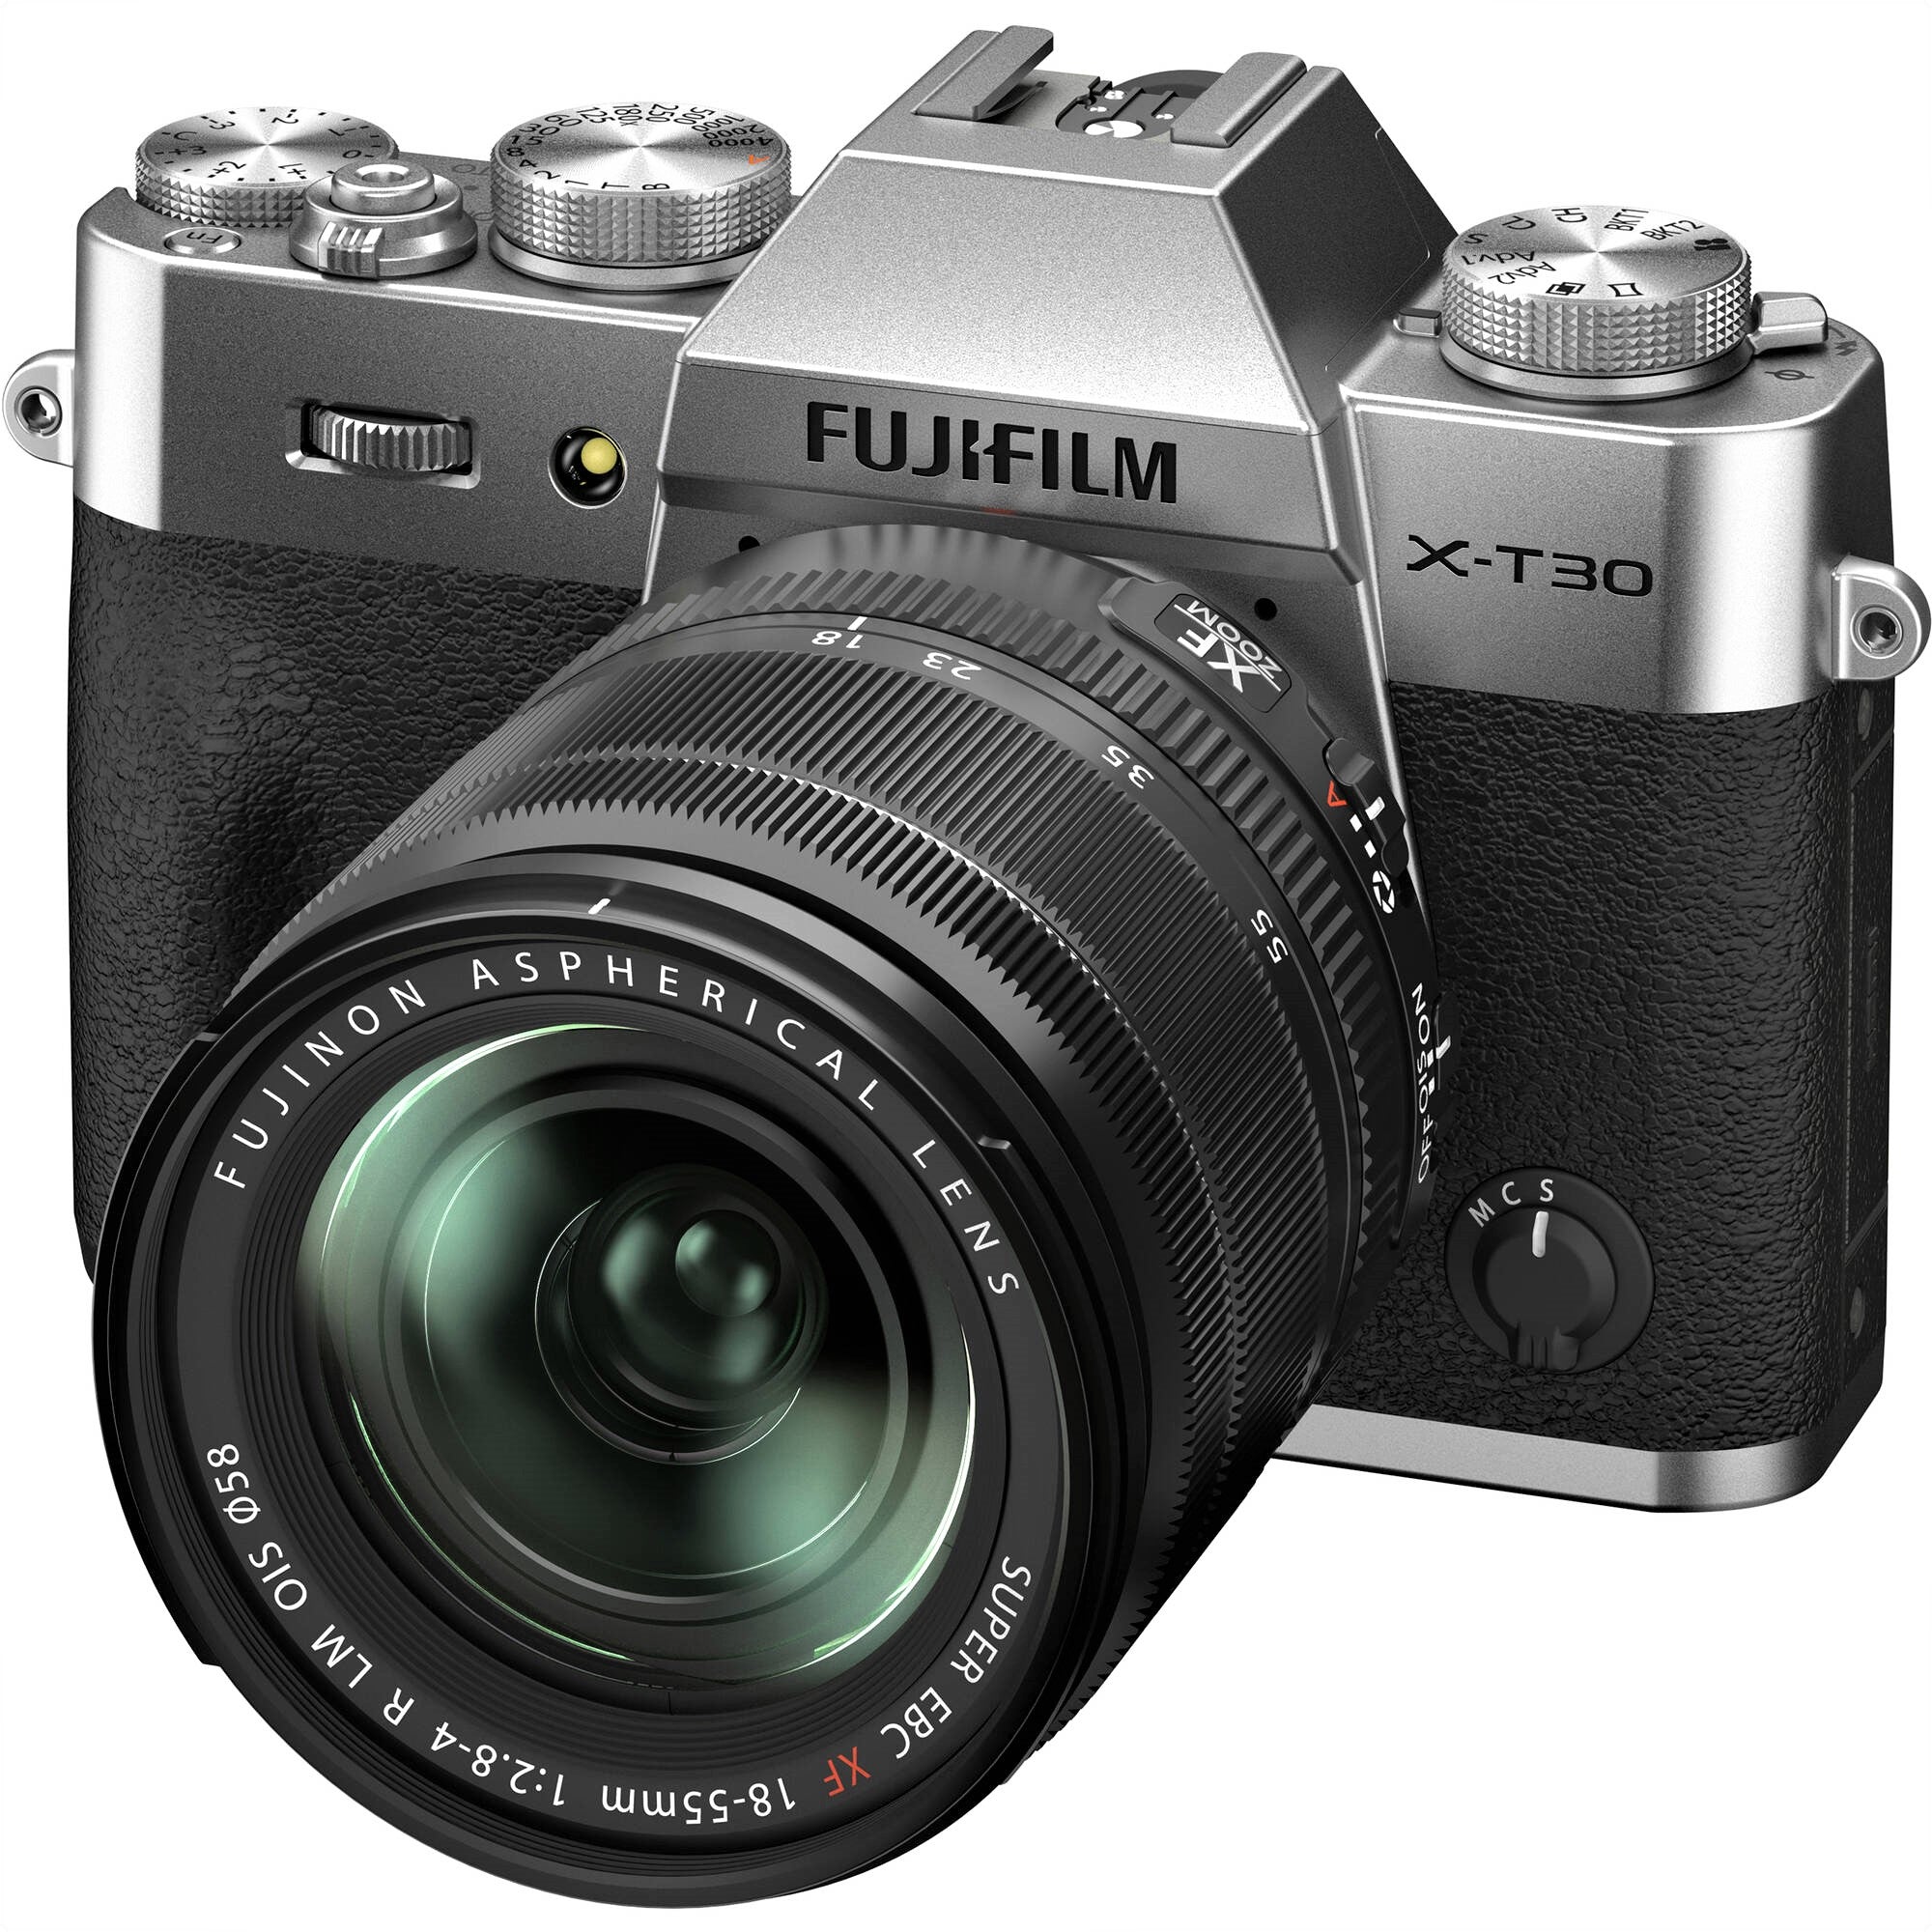 Fujifilm X-T30 II Mirrorless Camera with 18-55mm Lens (Silver) - Distant View